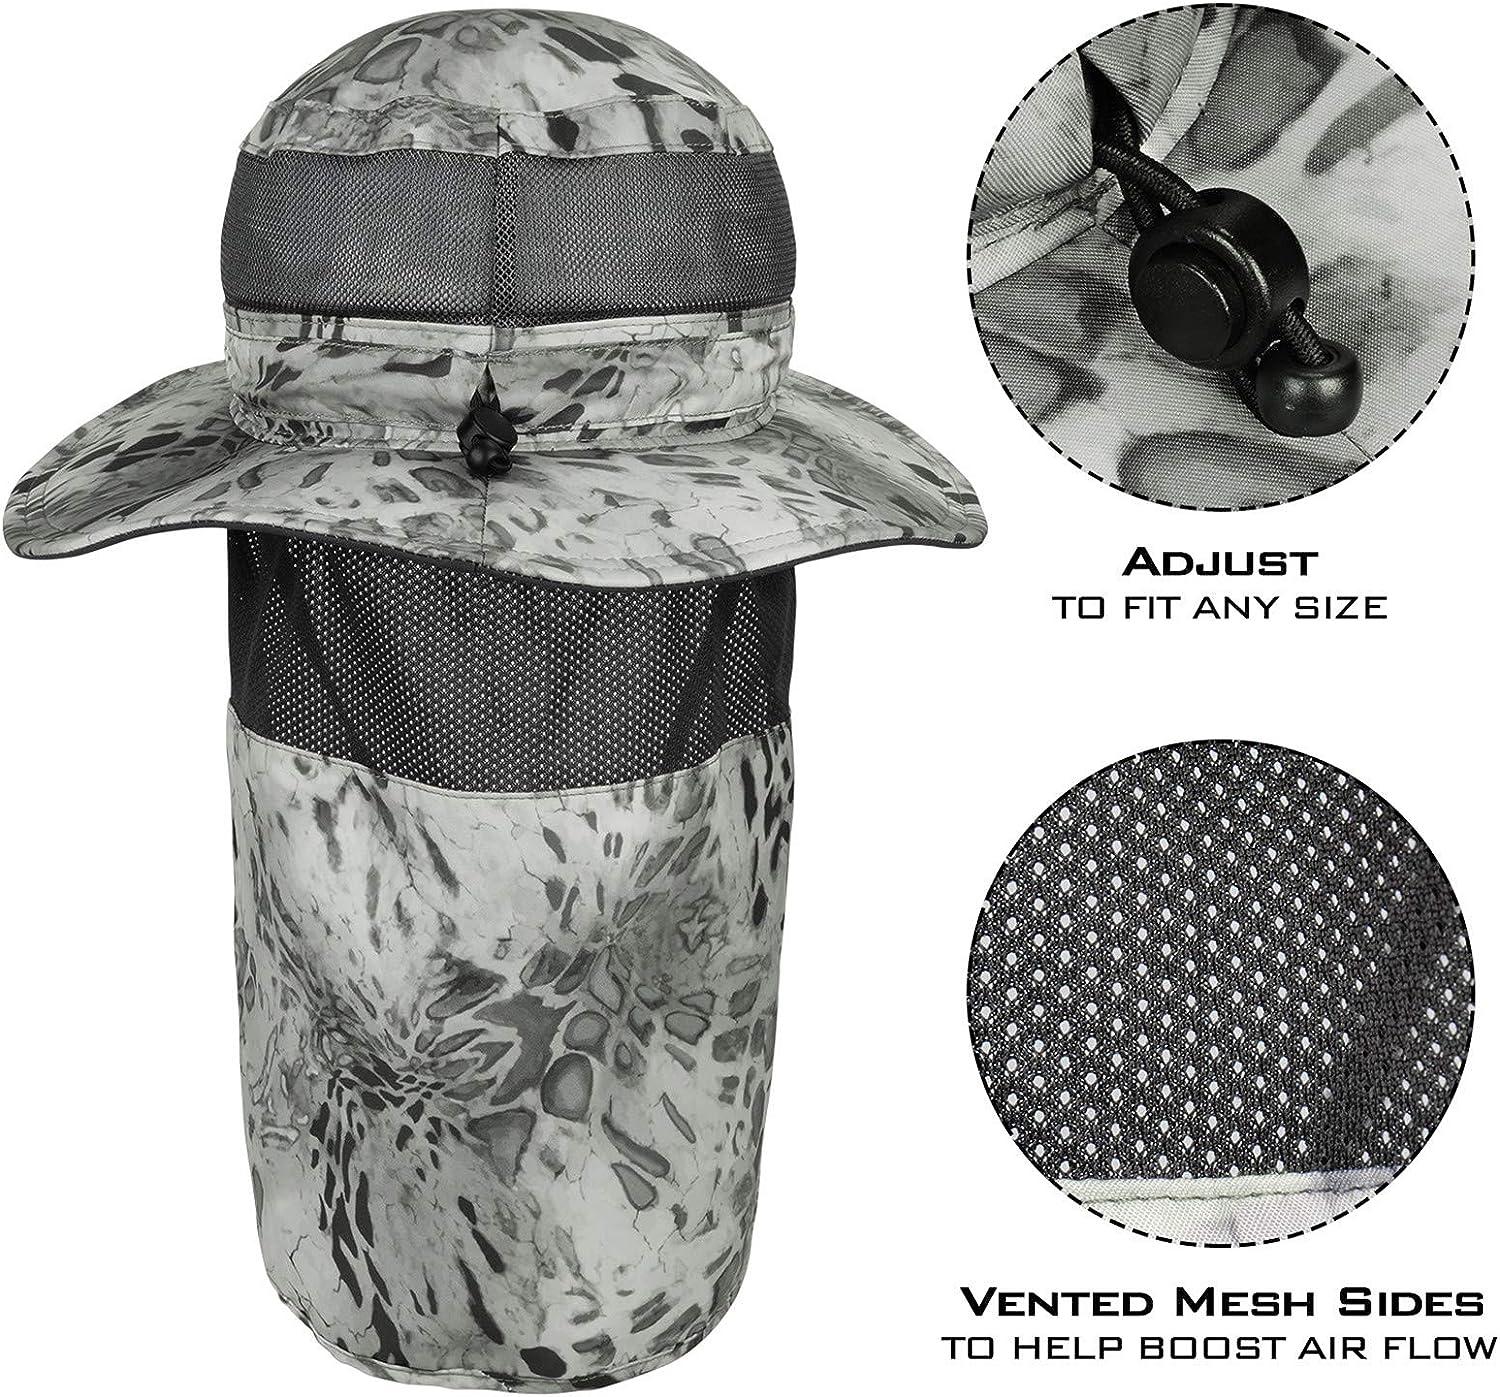 KastKing UPF 50 Boonie Hat Fishing Hat with Removable Neck Flap